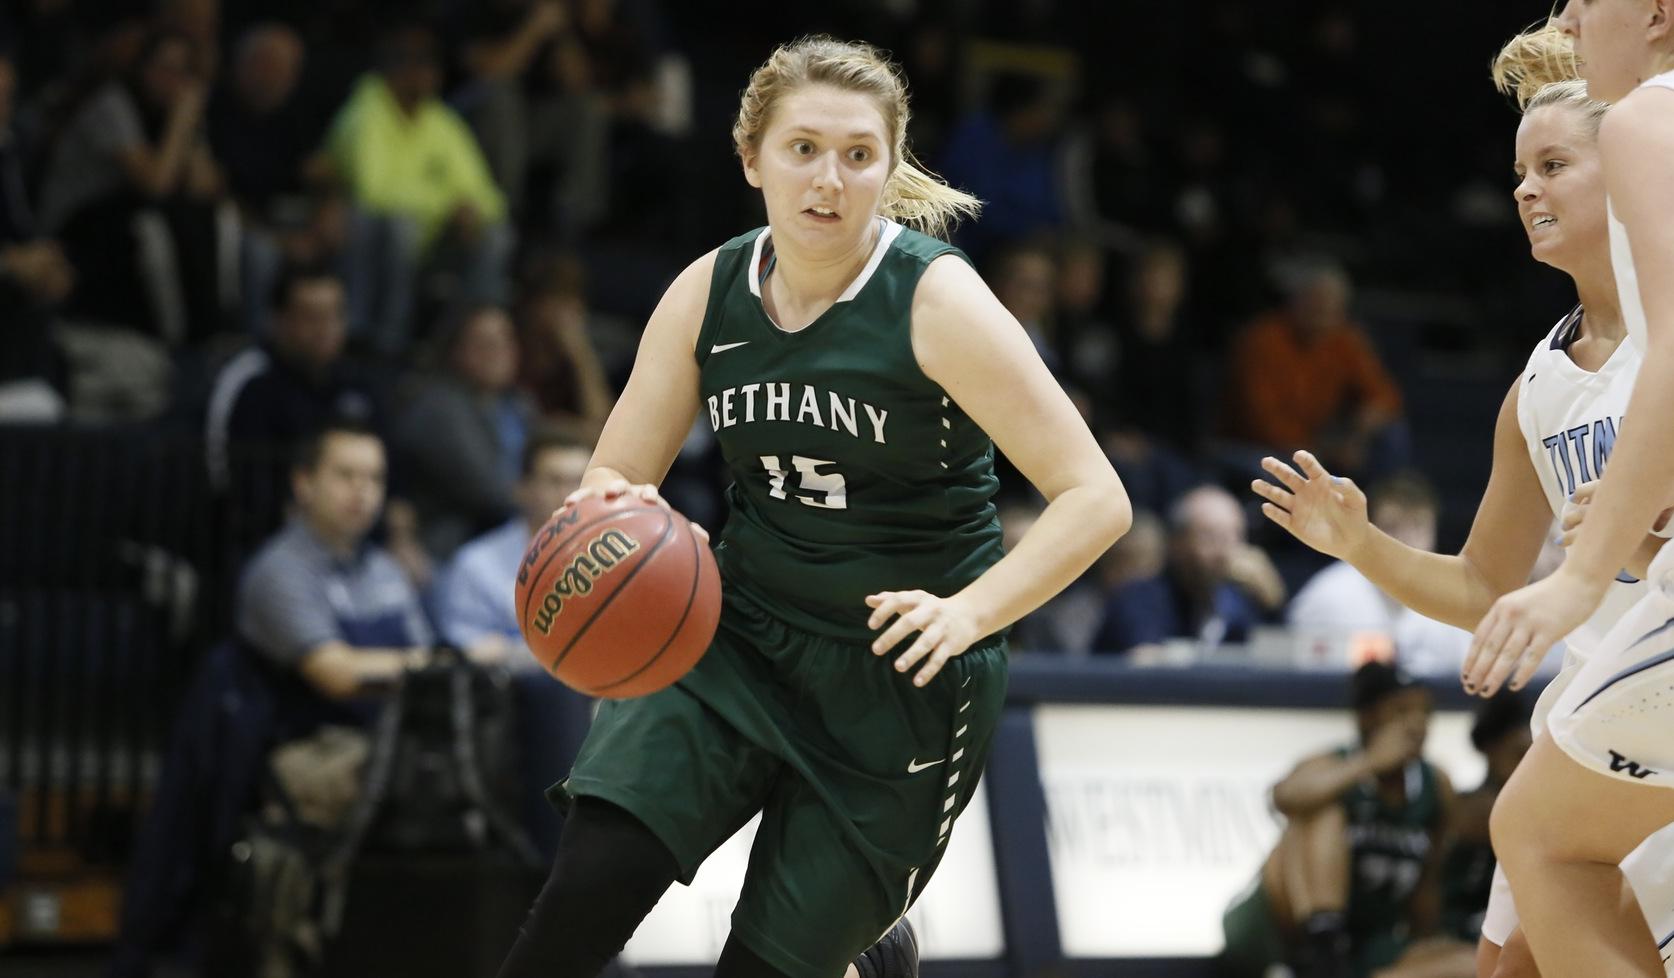 Bethany Handed 76-51 loss on the Road to Carnegie Mellon